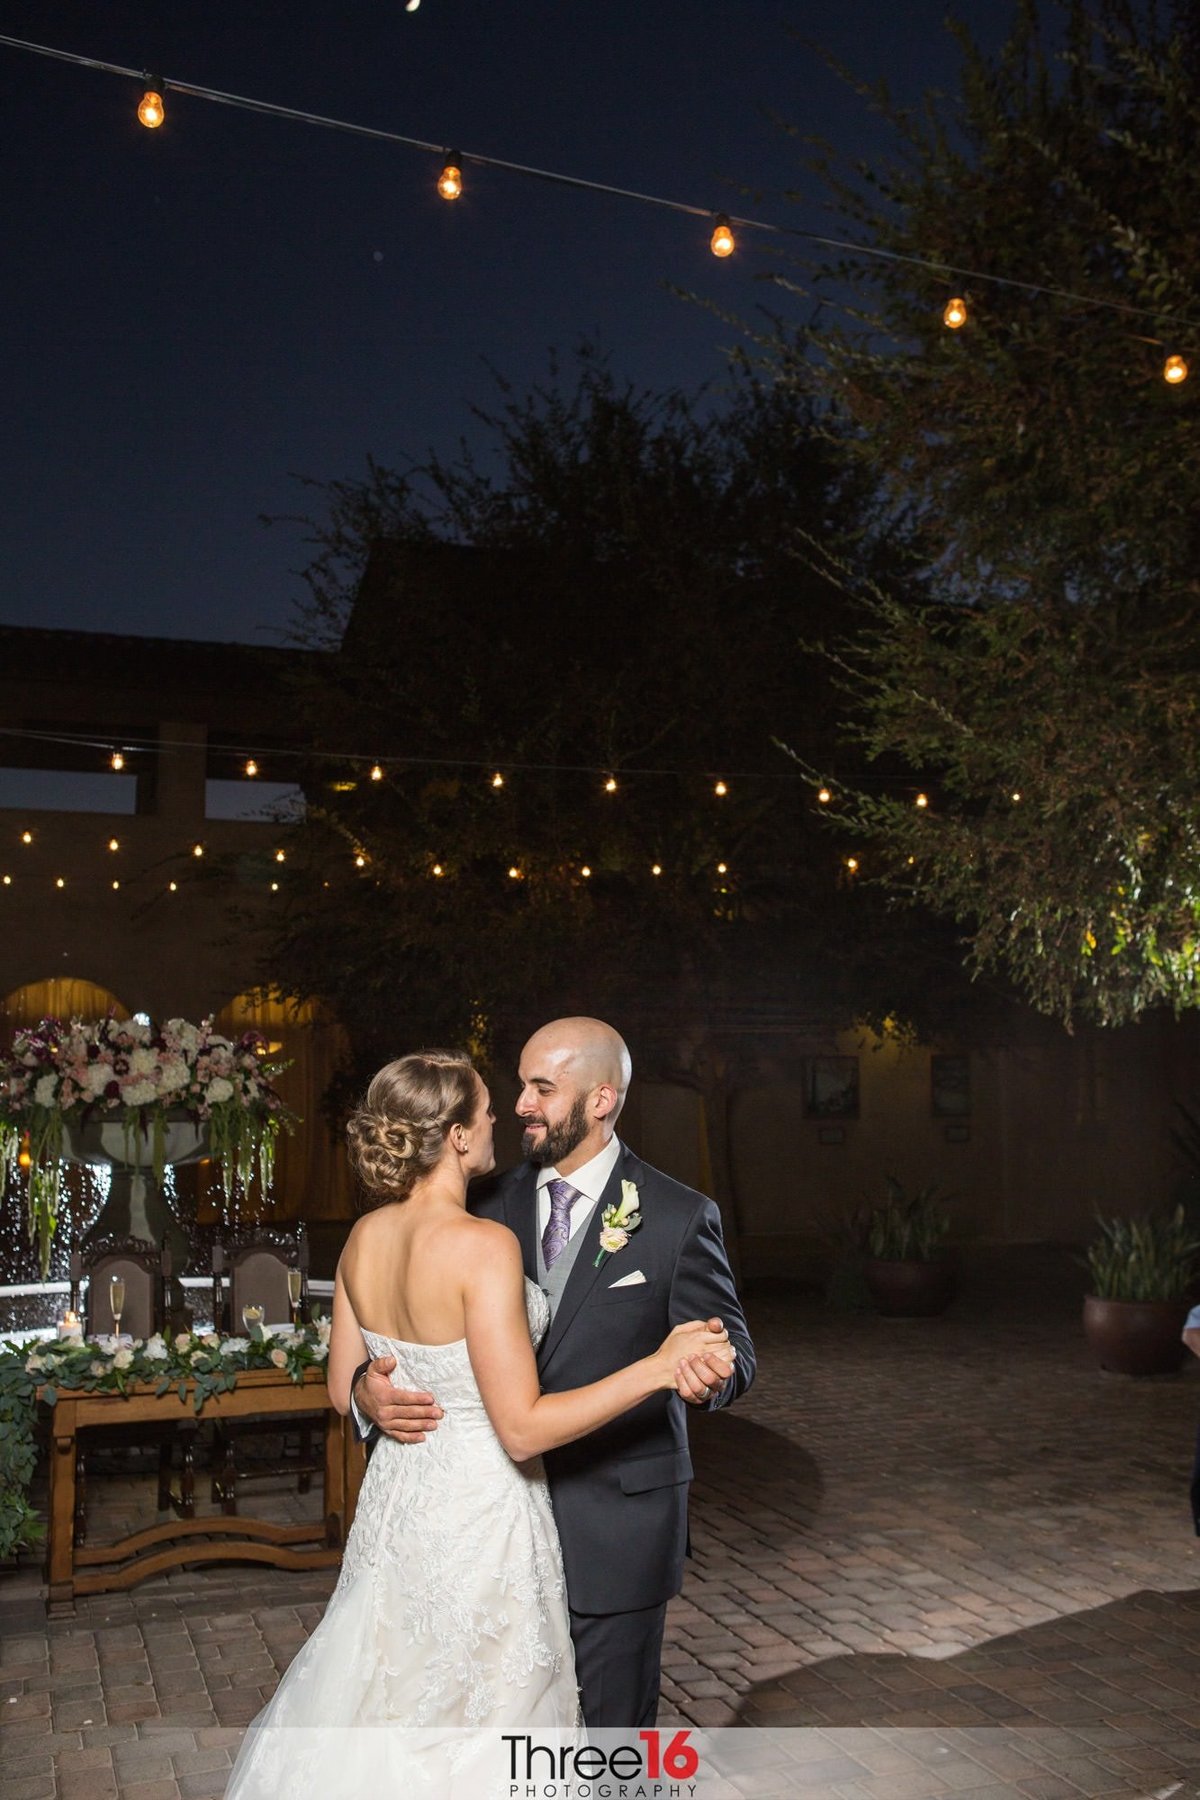 Bride and Groom dance their first dance under the dark sky night